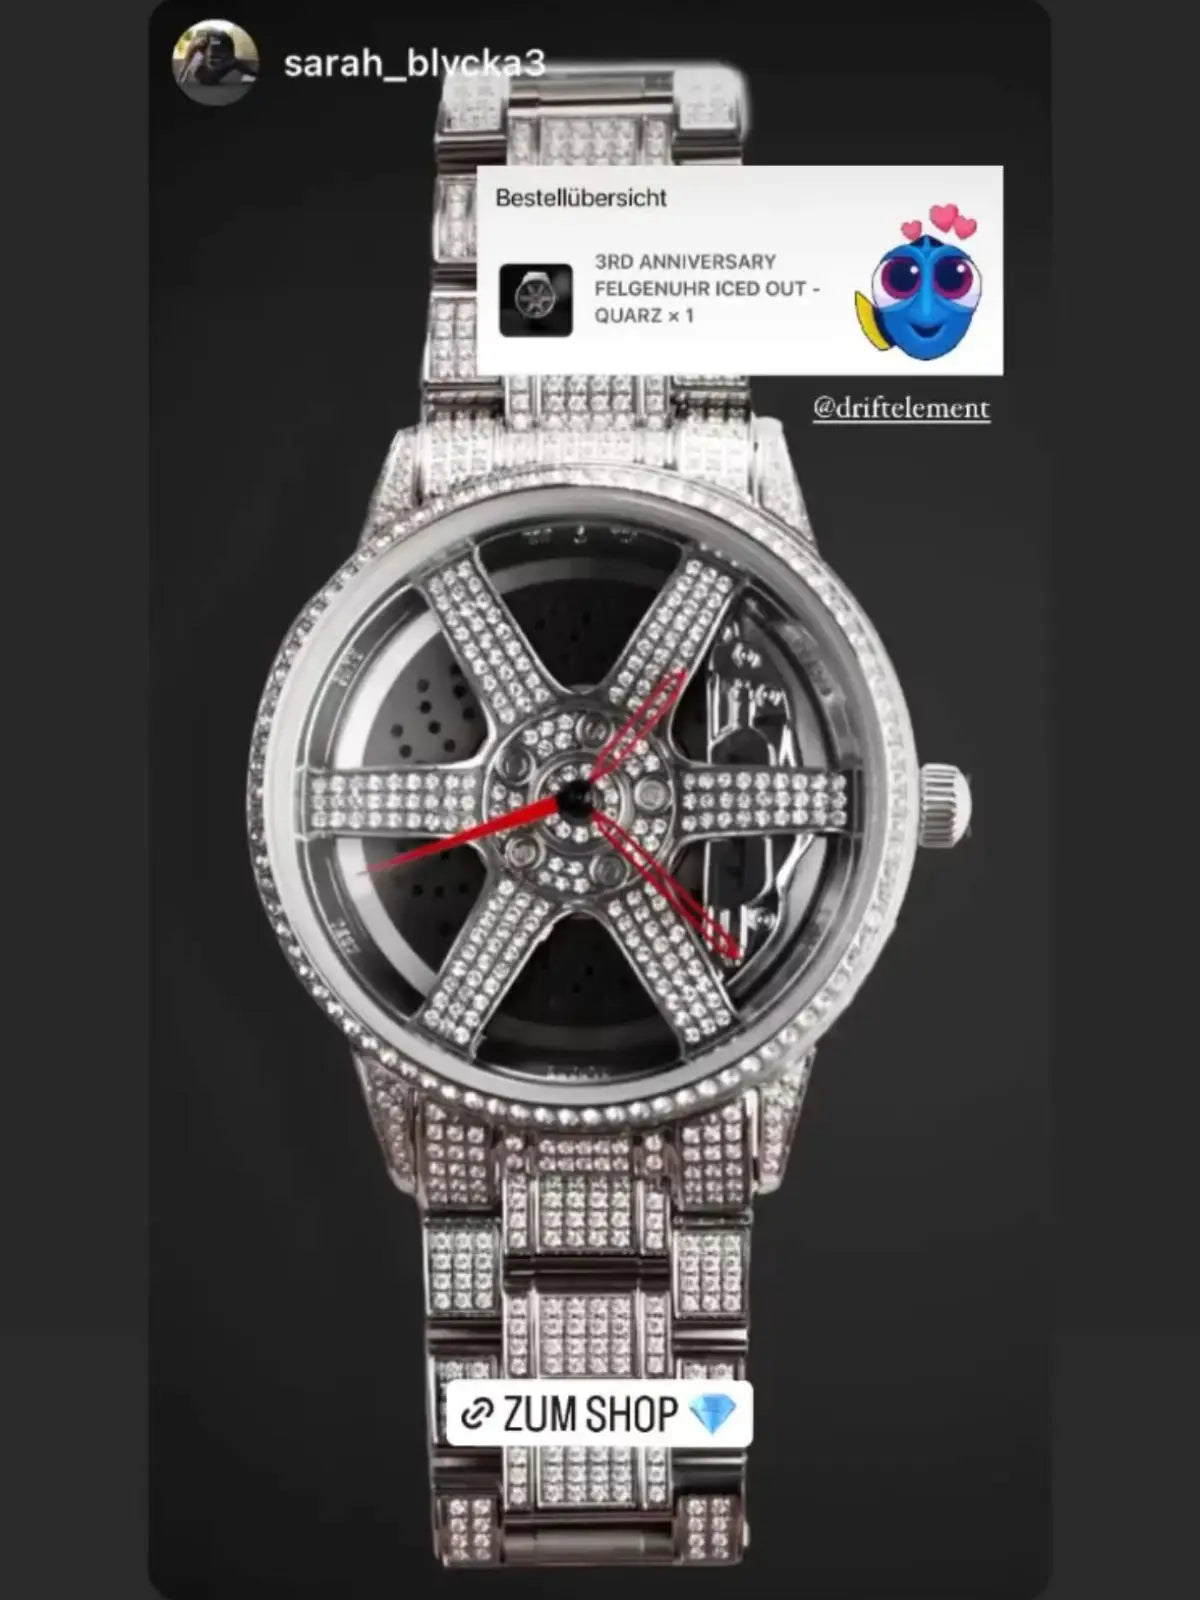 The image shows a highly detailed and luxurious watch from DriftElement, a young startup from Germany. The watch is fully embellished with what appears to be small, sparkling stones, creating an "iced out" effect that covers the entire watch face, bezel, and band. This timepiece features a distinctive rim design on the dial that is characteristic of DriftElement's innovative design ethos, fusing the spirit of automotive culture with high-end watchmaking.